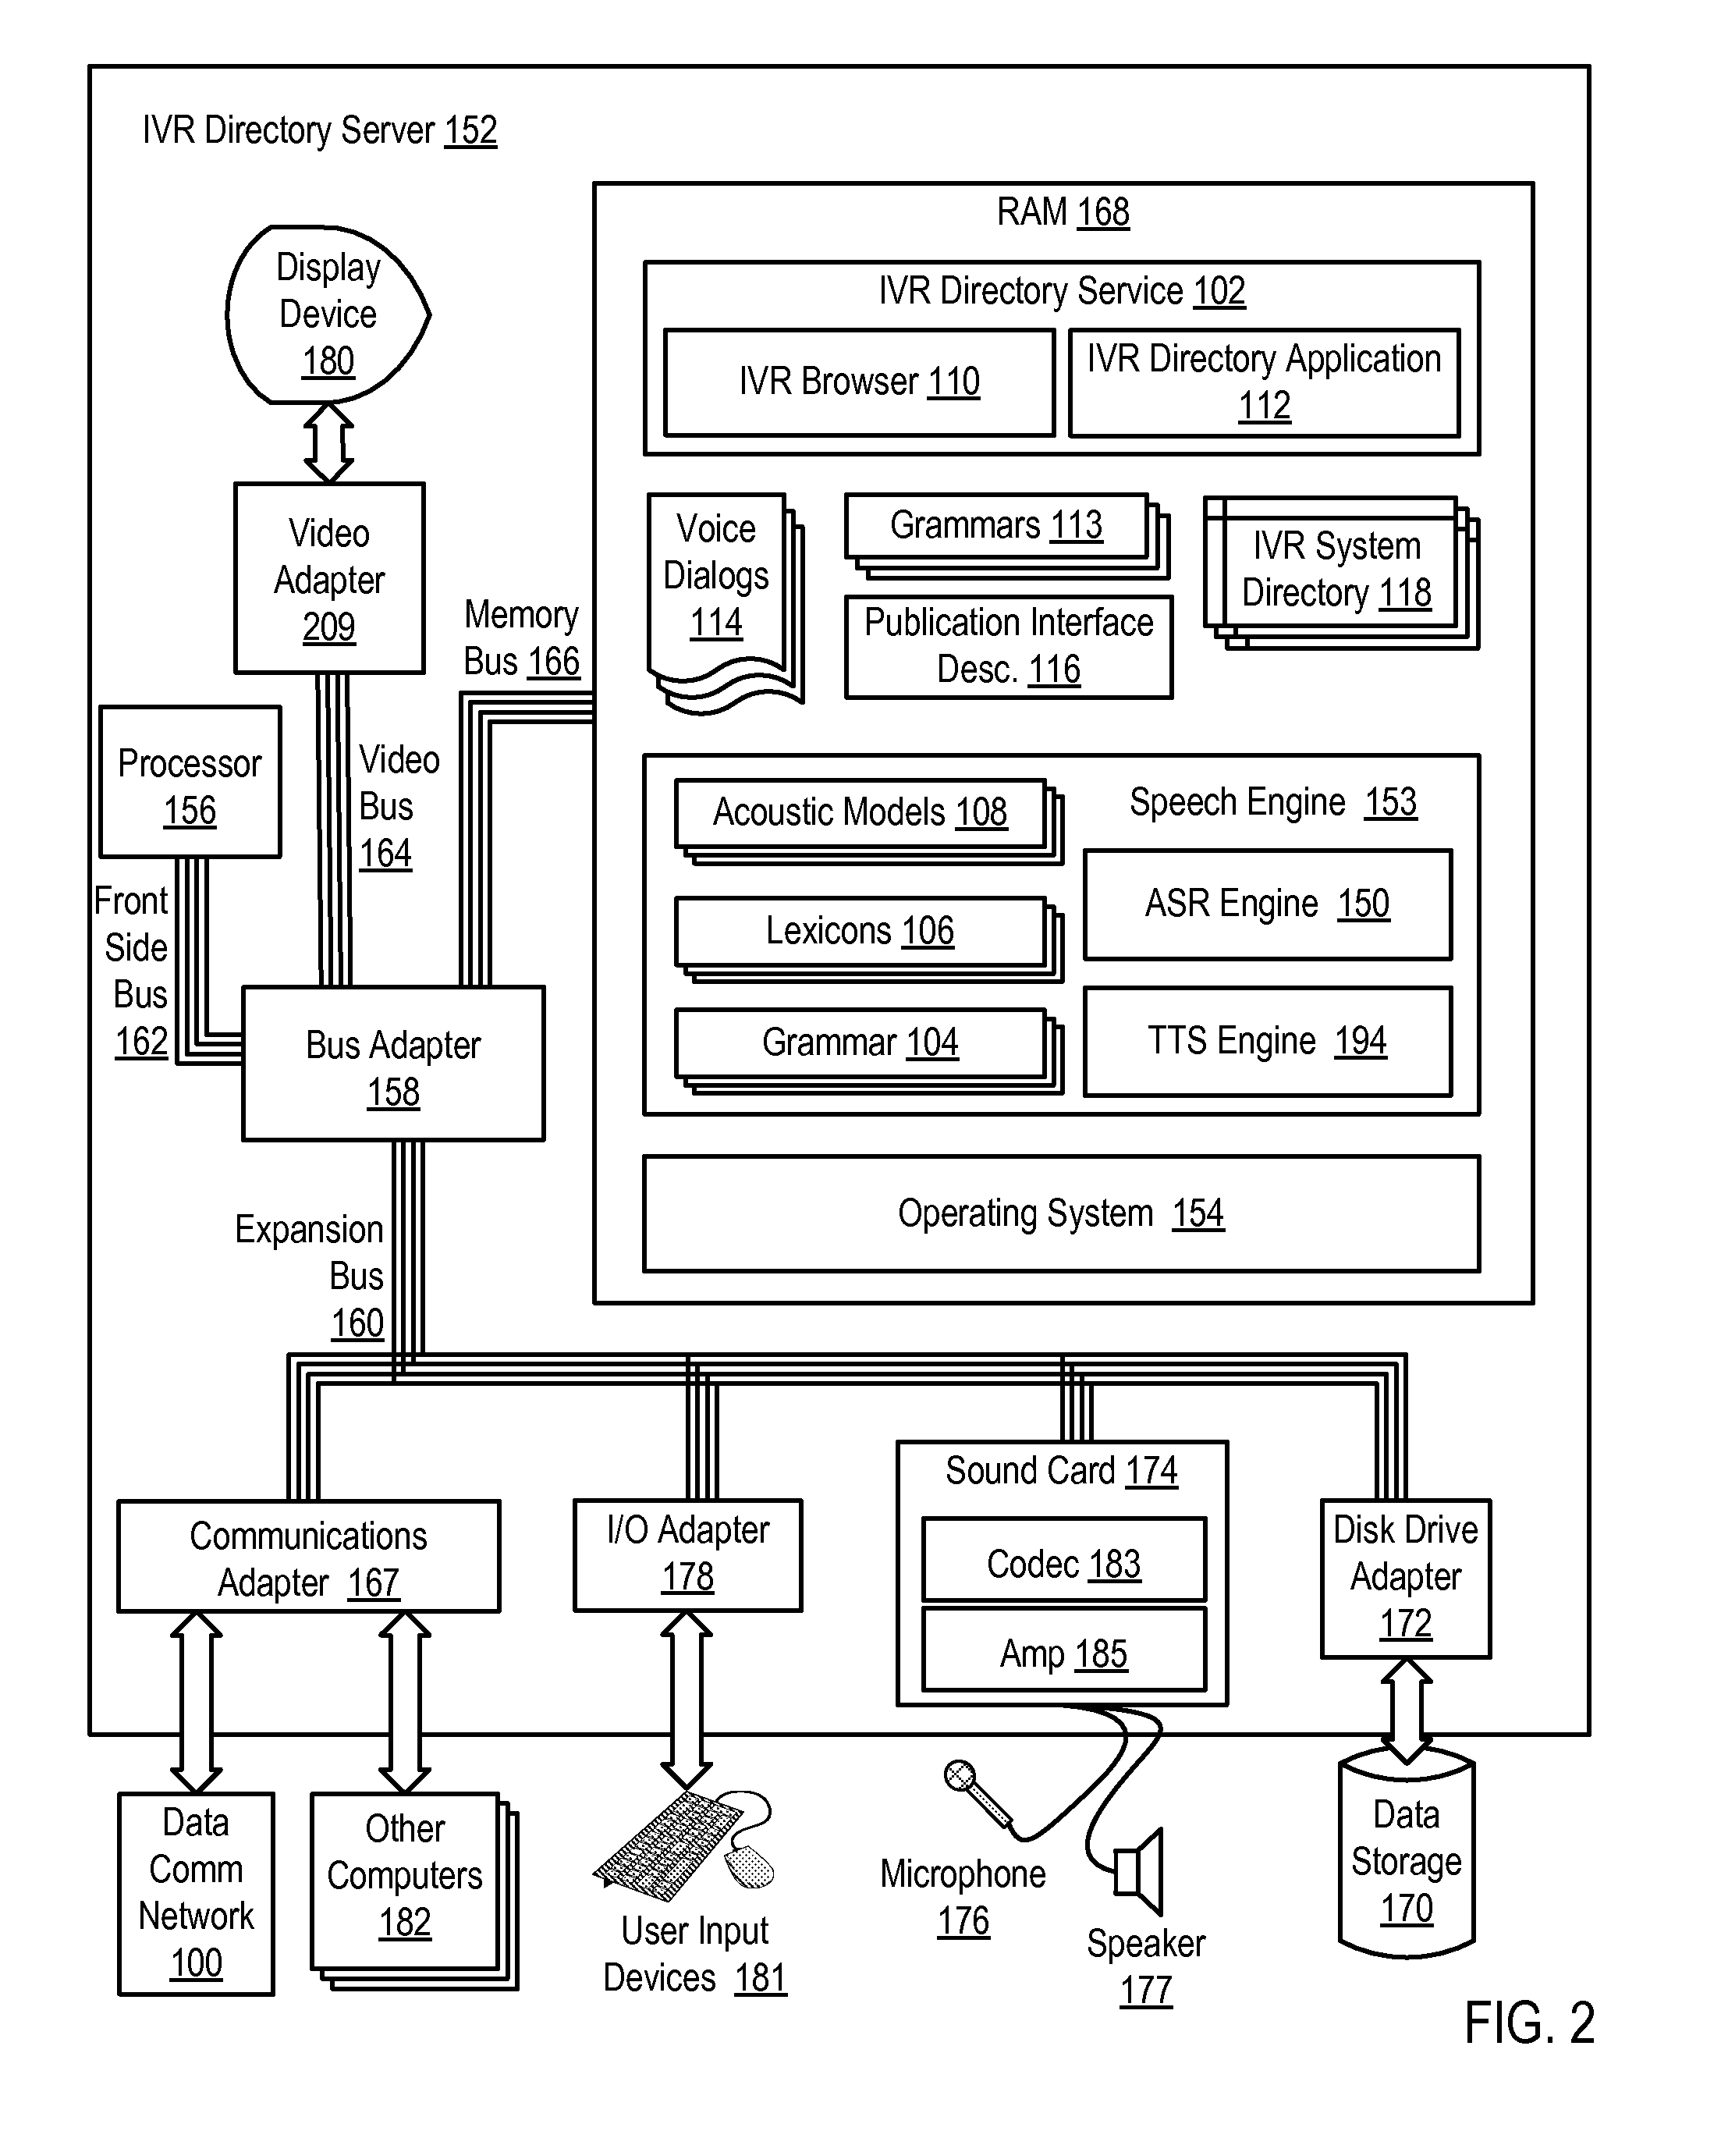 Dynamically publishing directory information for a plurality of interactive voice response systems